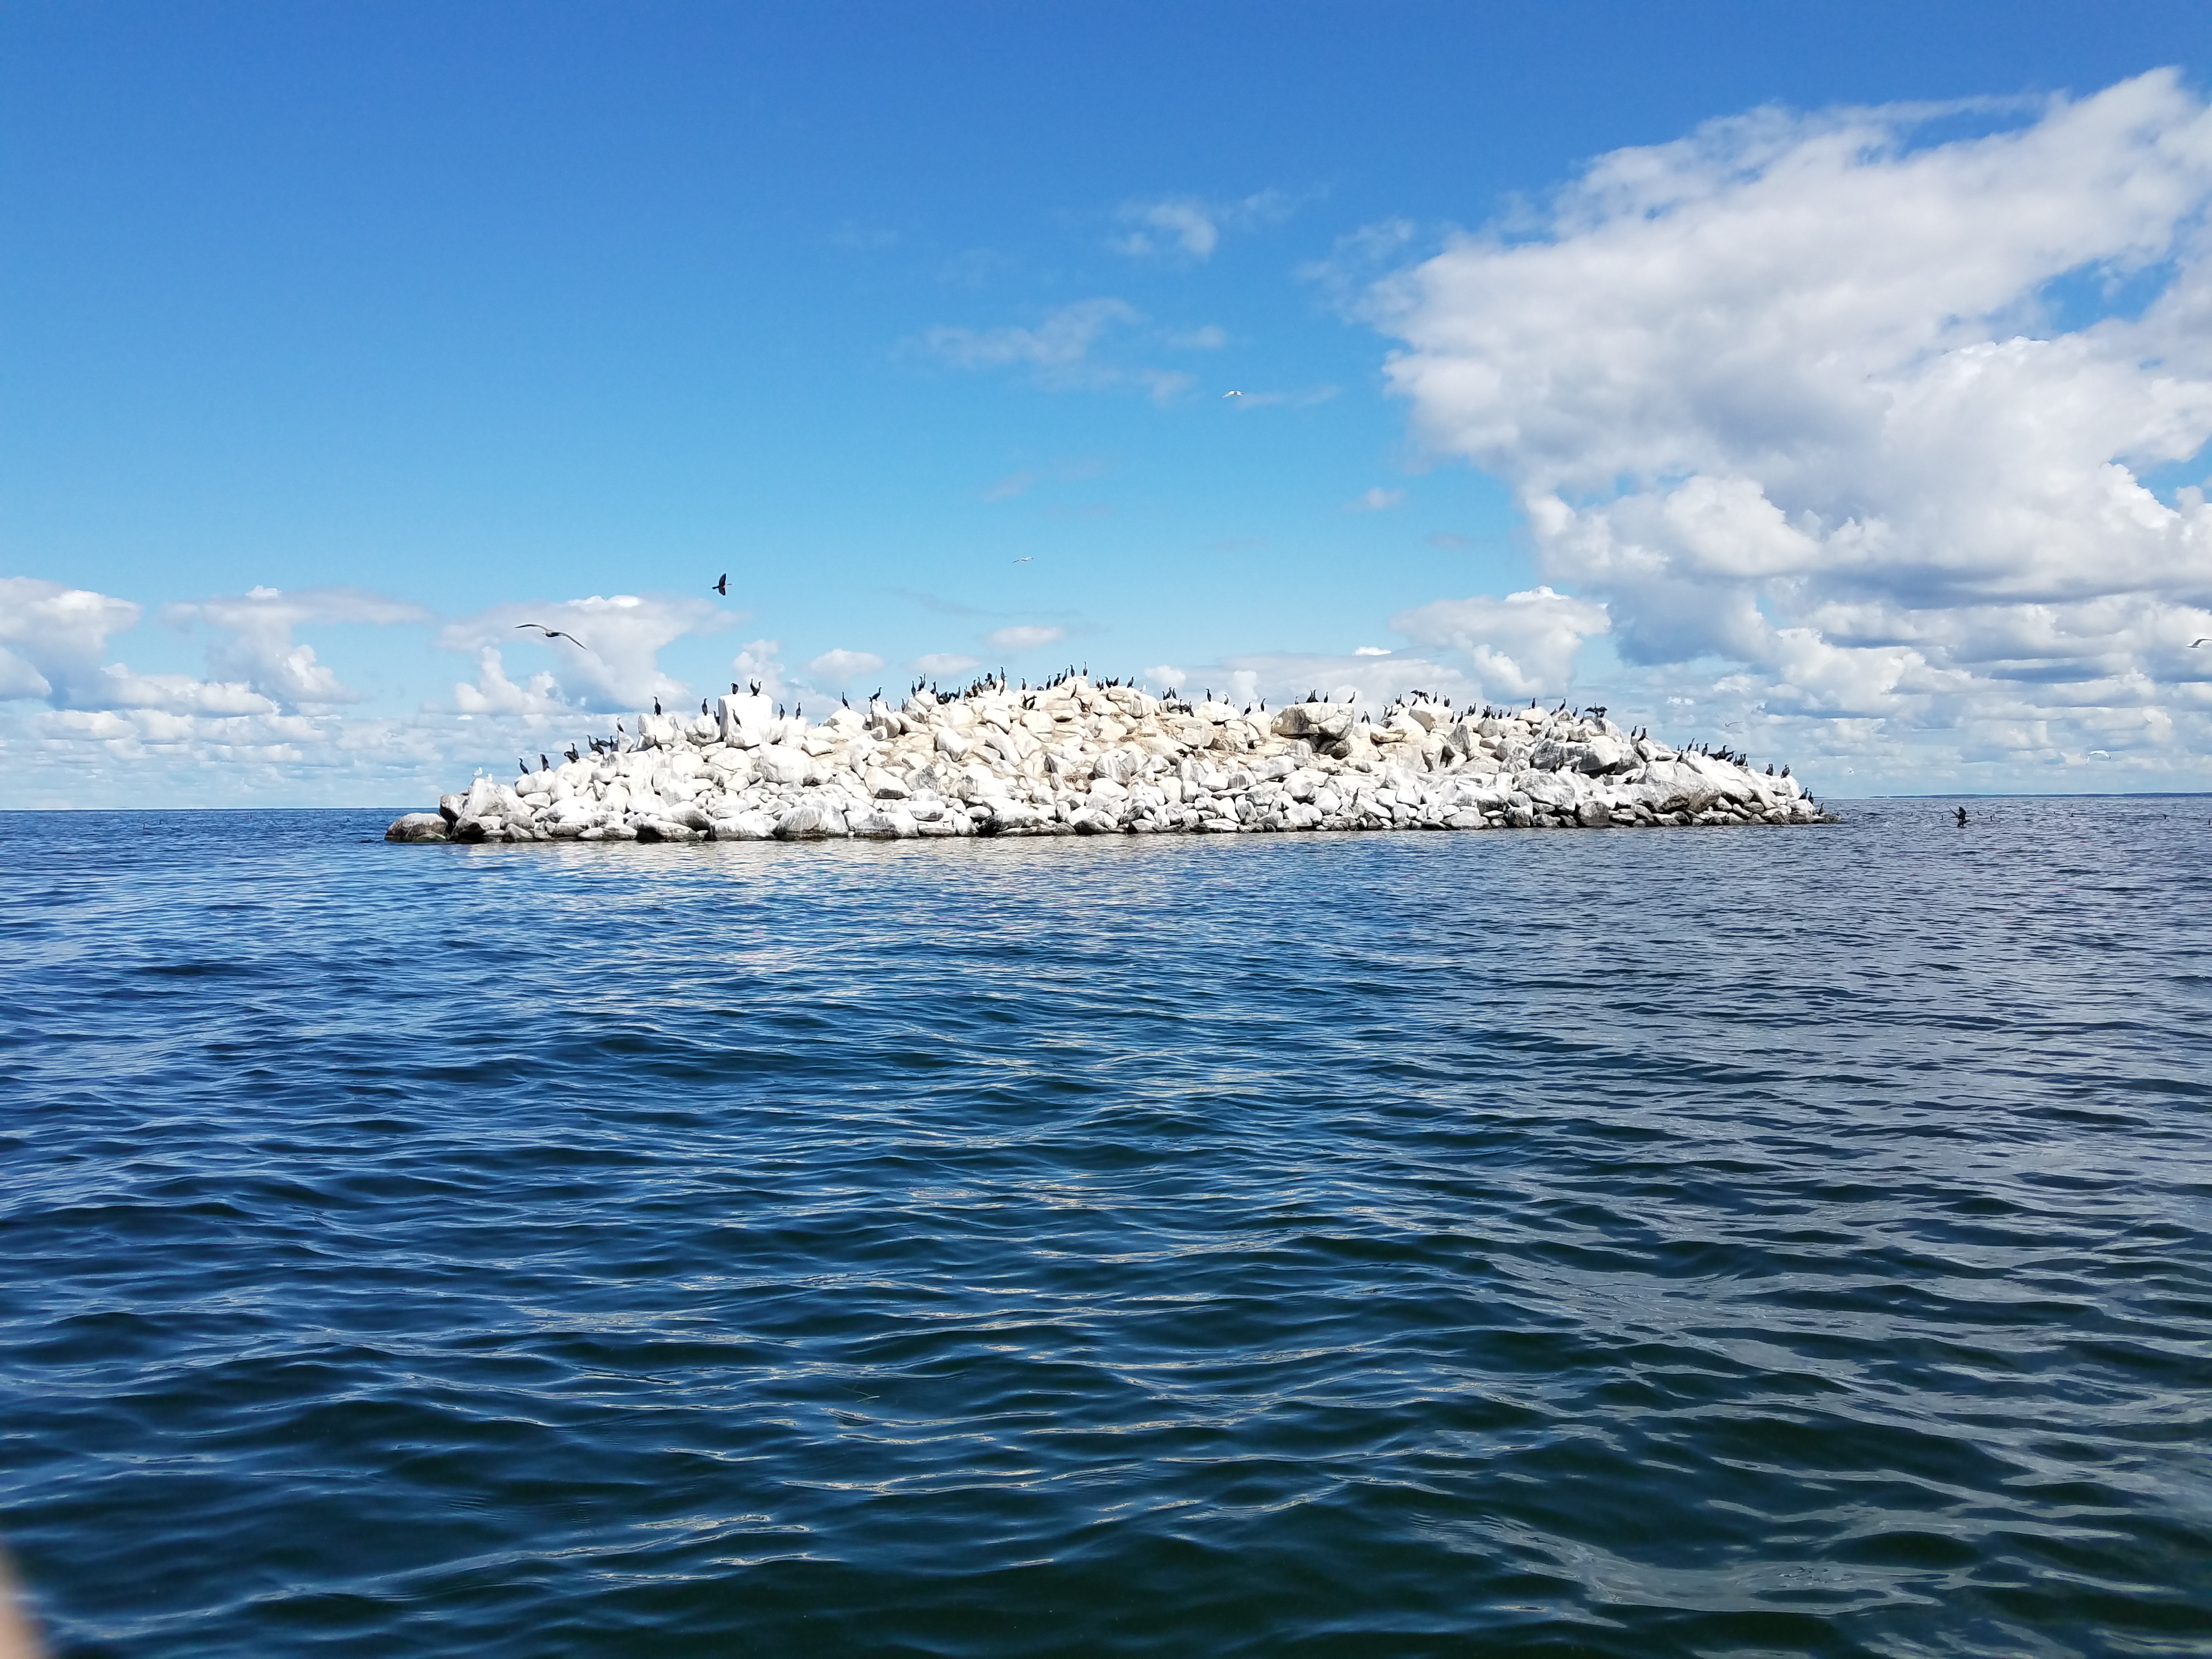 A white, rocky island is centered in the image, with rippled deep blue lake in the foreground and a bright blue sky with puffy clouds above the horizon. A handful of cormorants are perched on or flying above the small island.